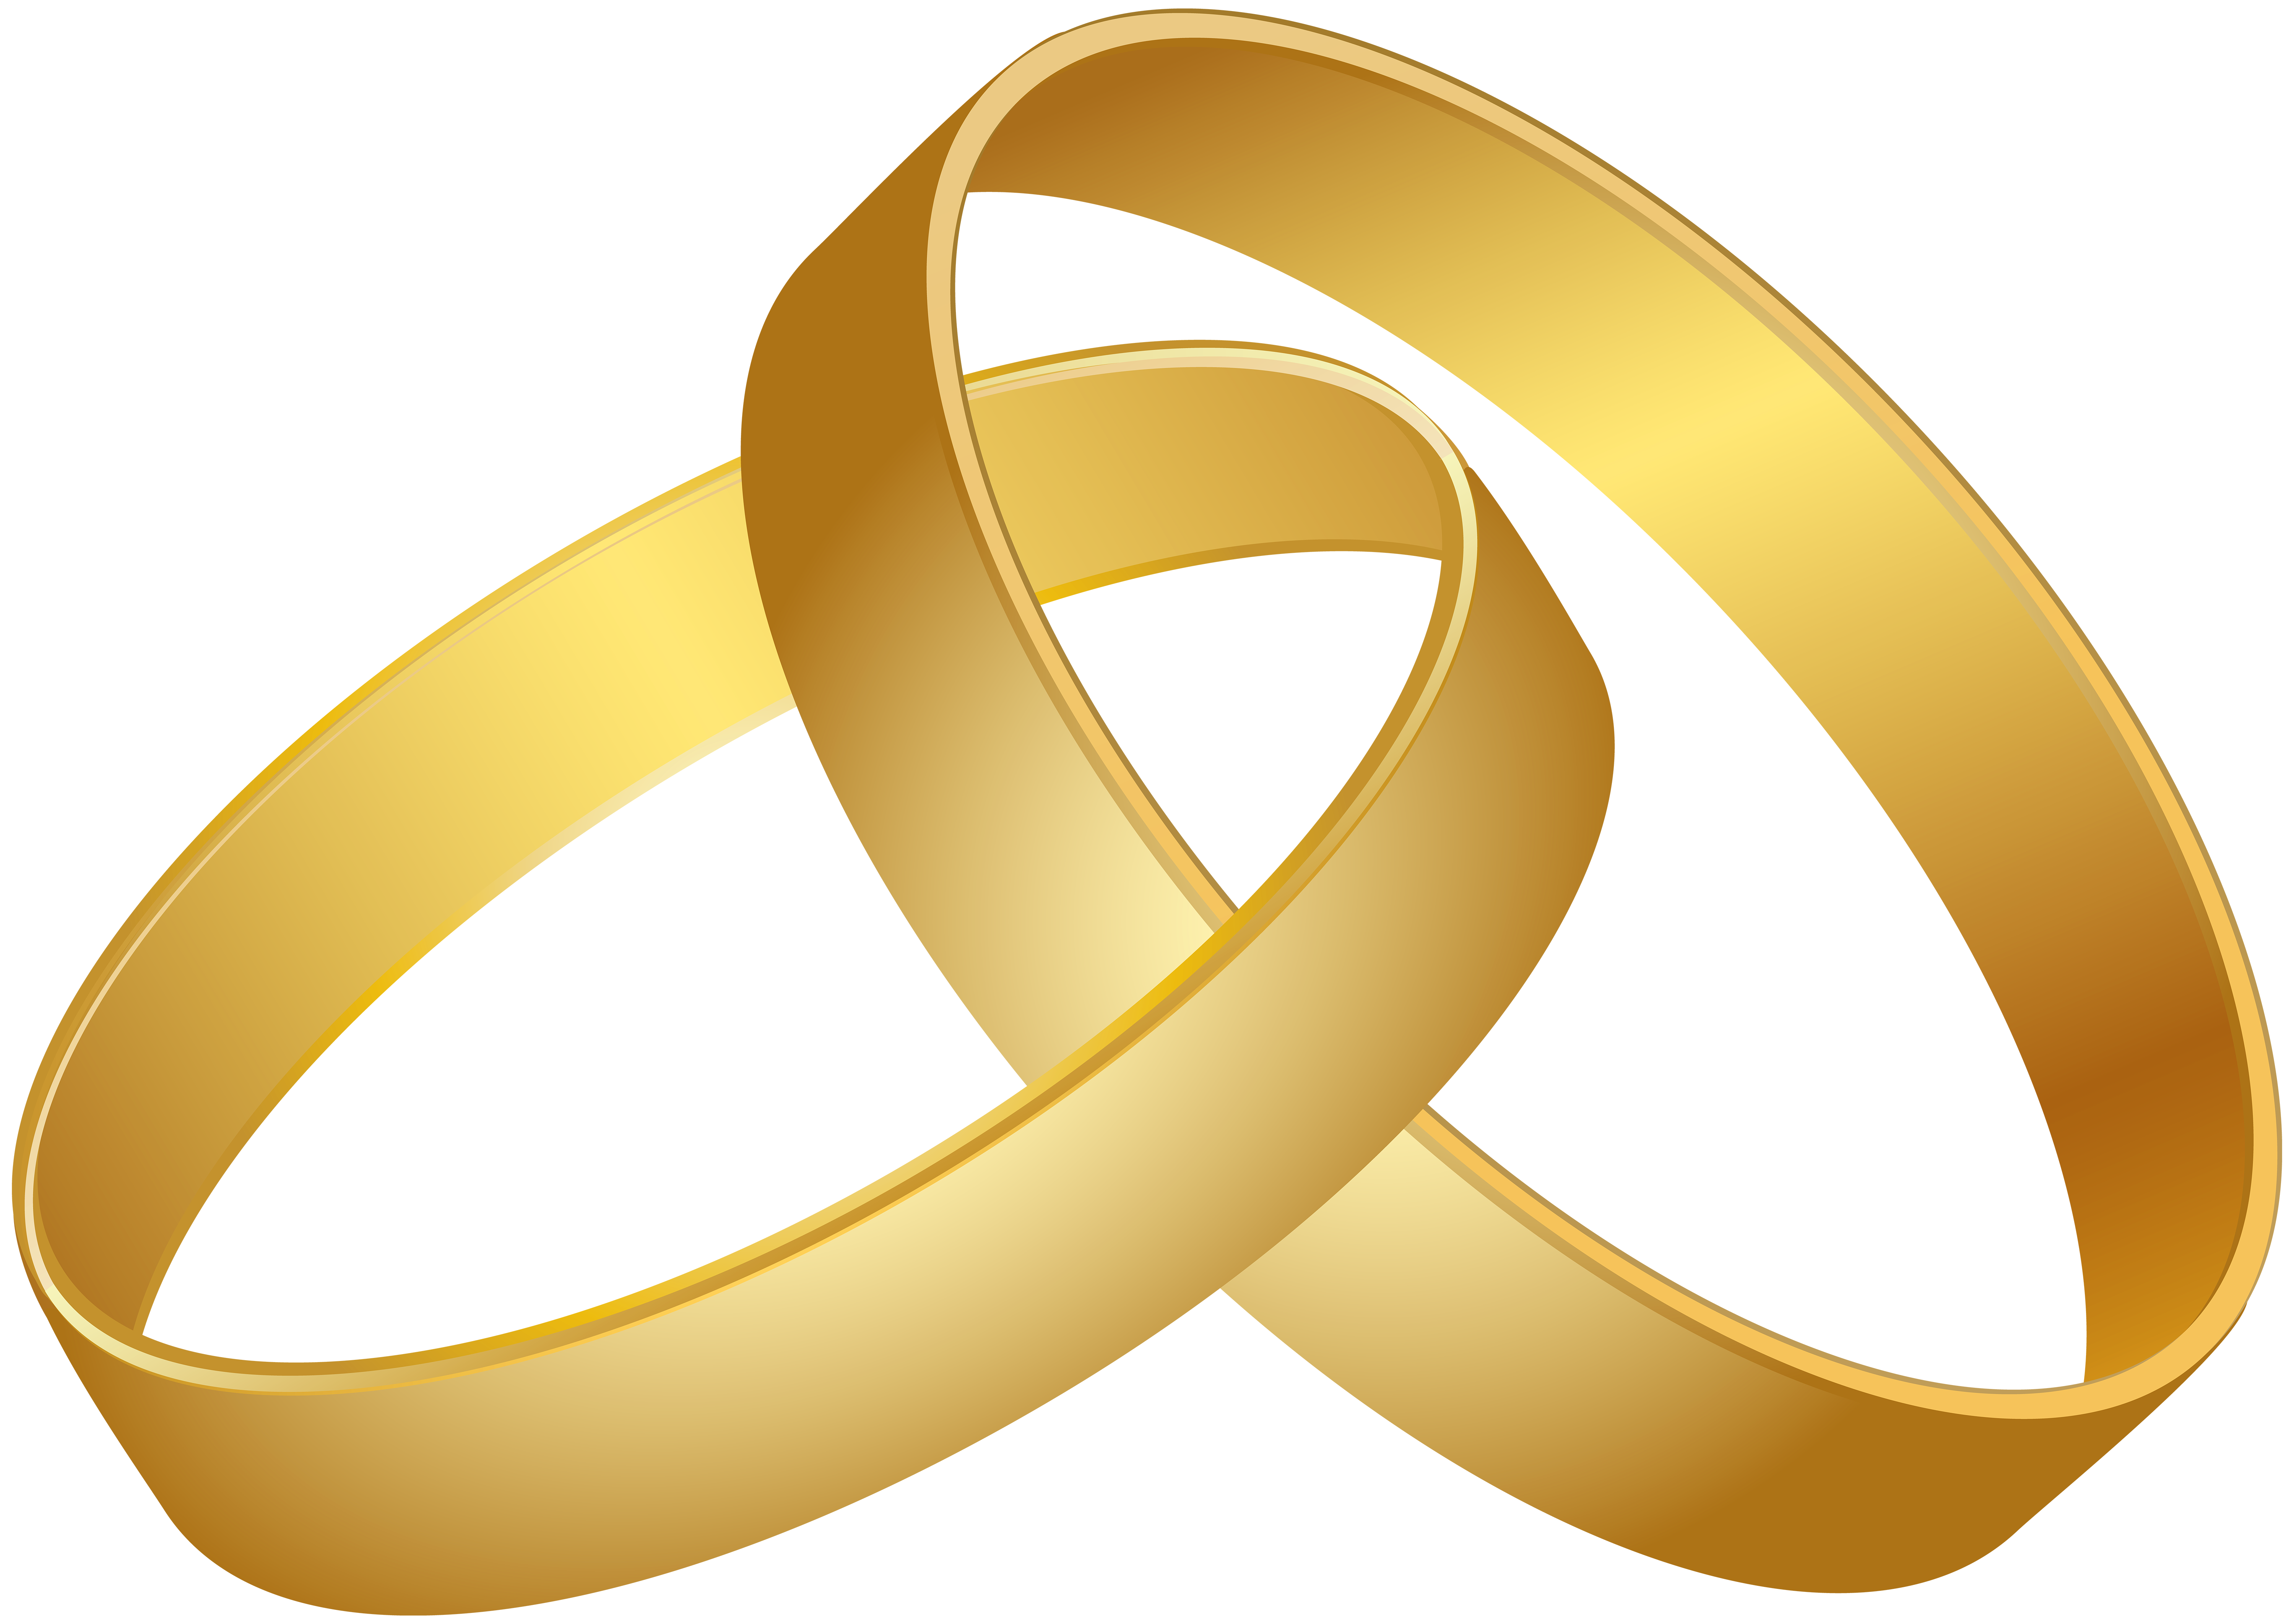 Wedding Rings Gold PNG Clip Art - Best WEB Clipart